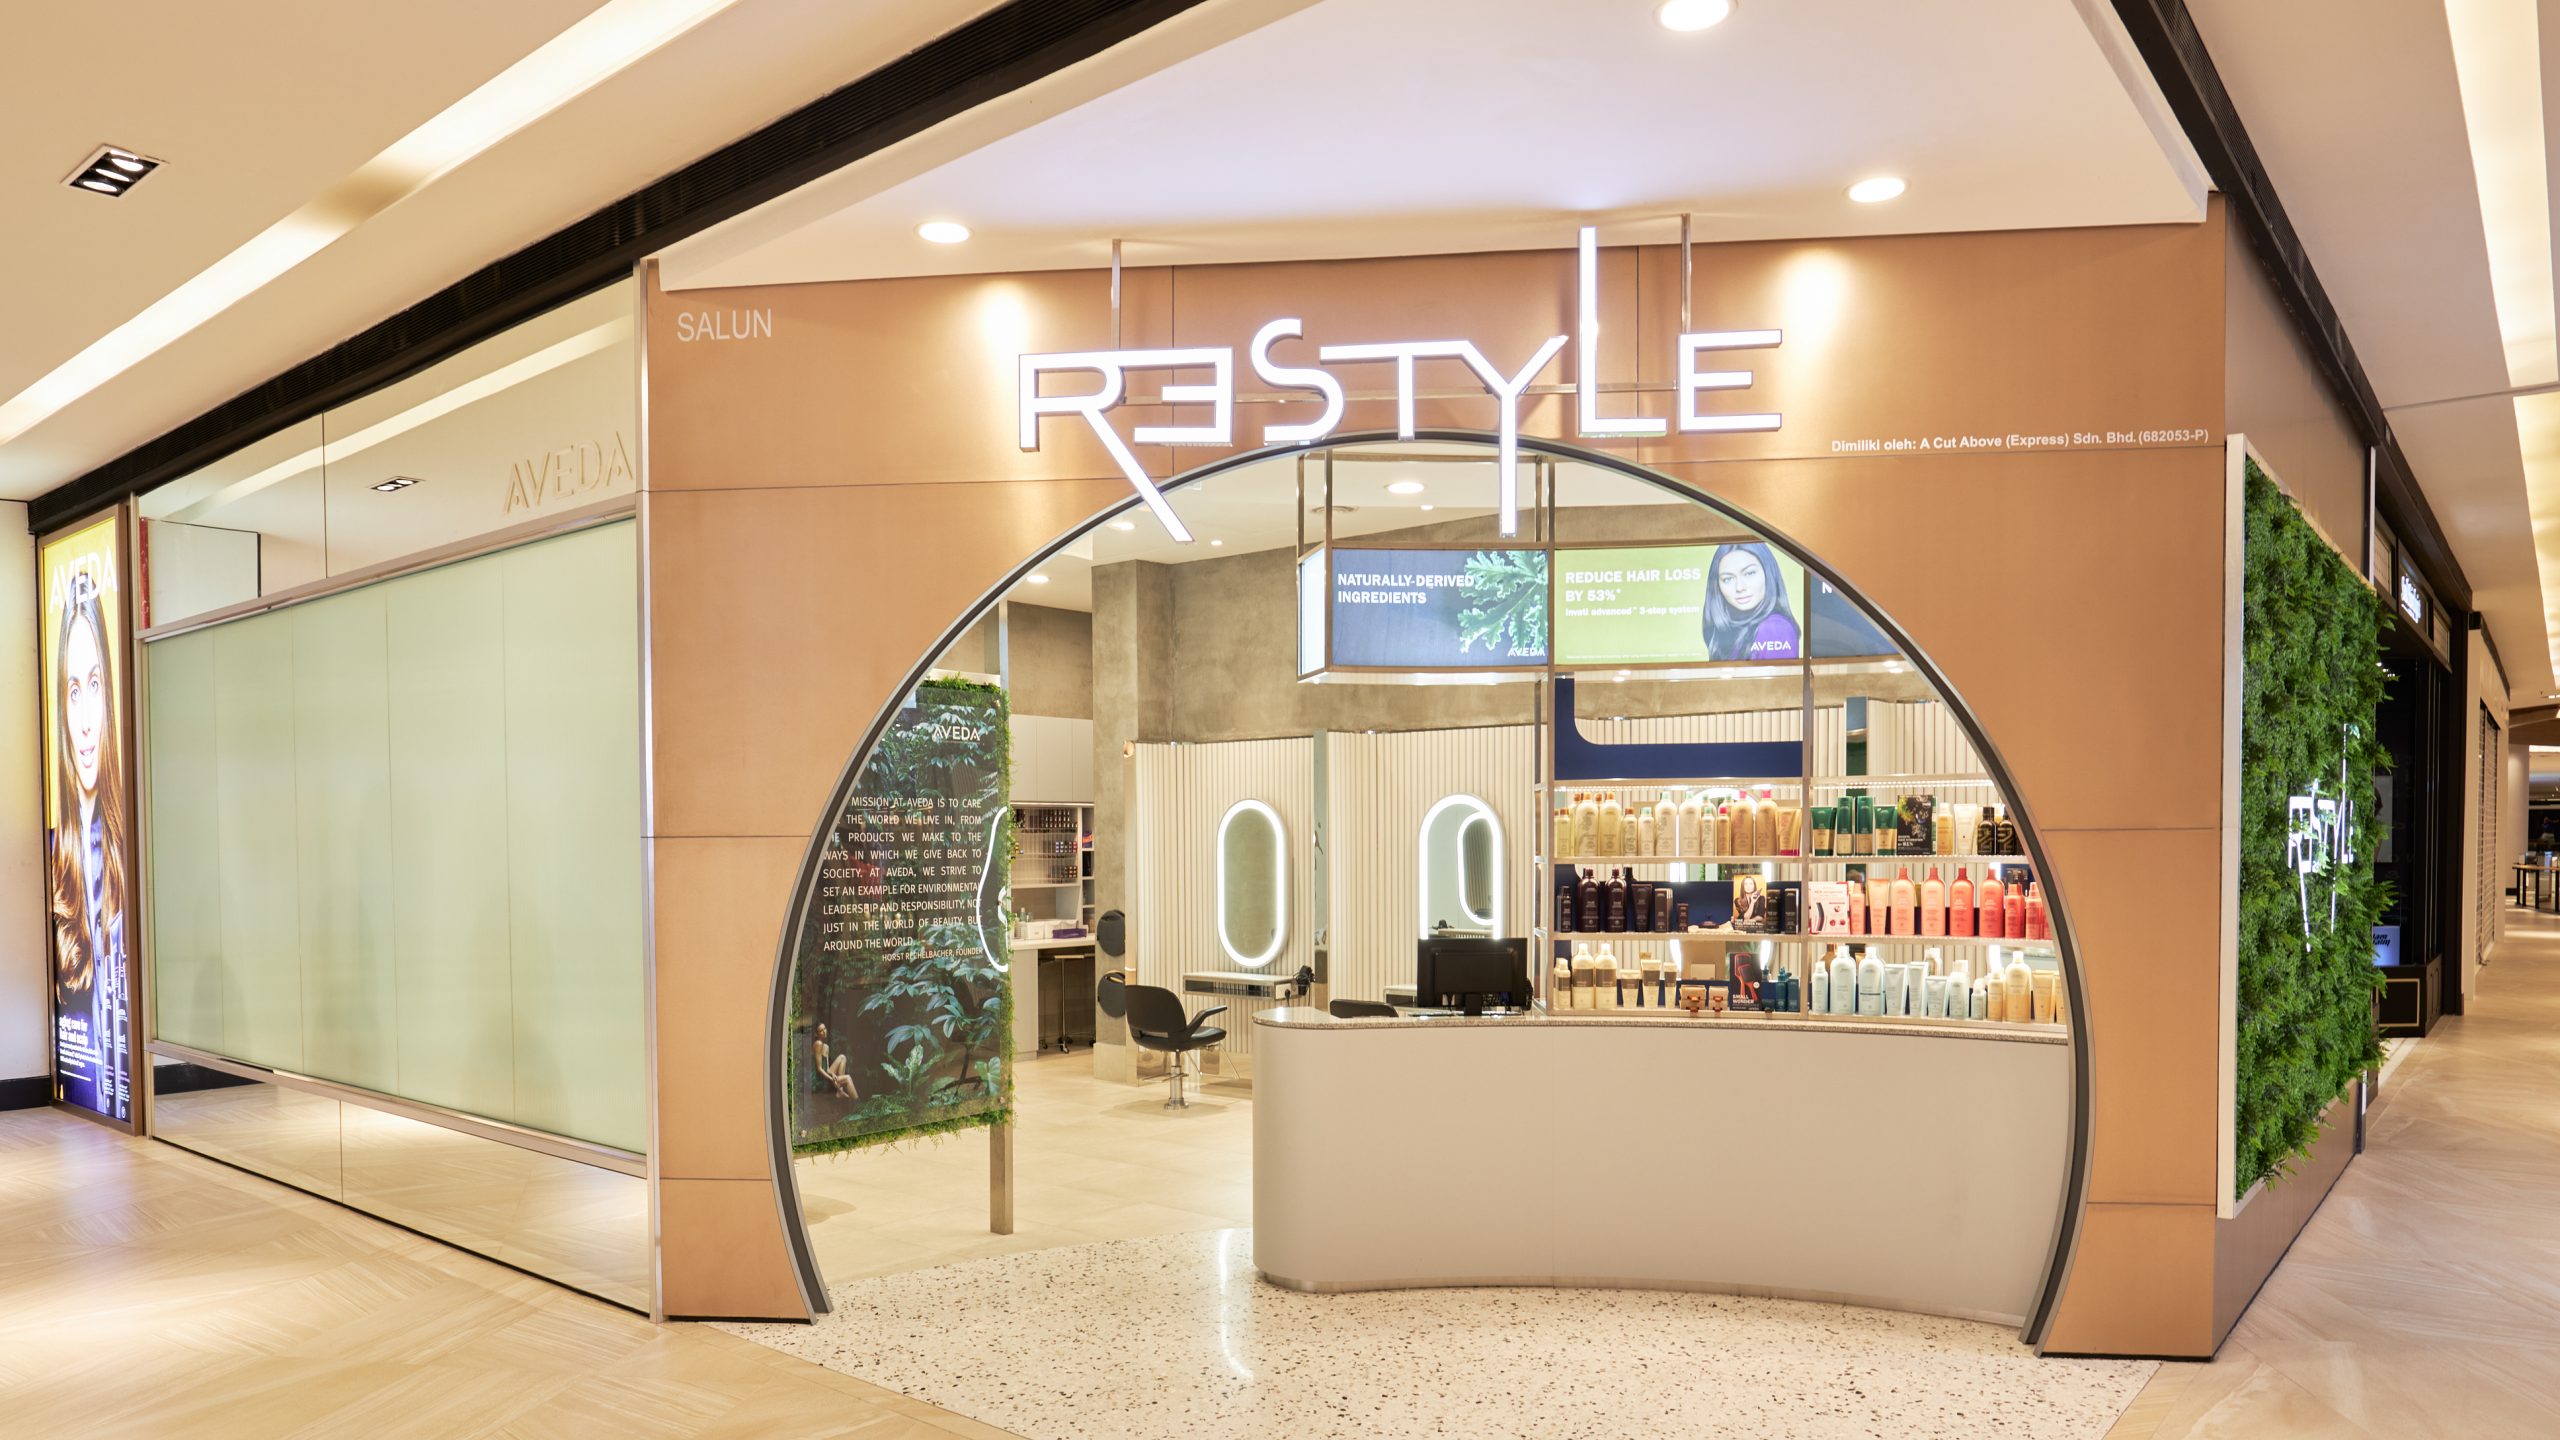 About Us - Restyle